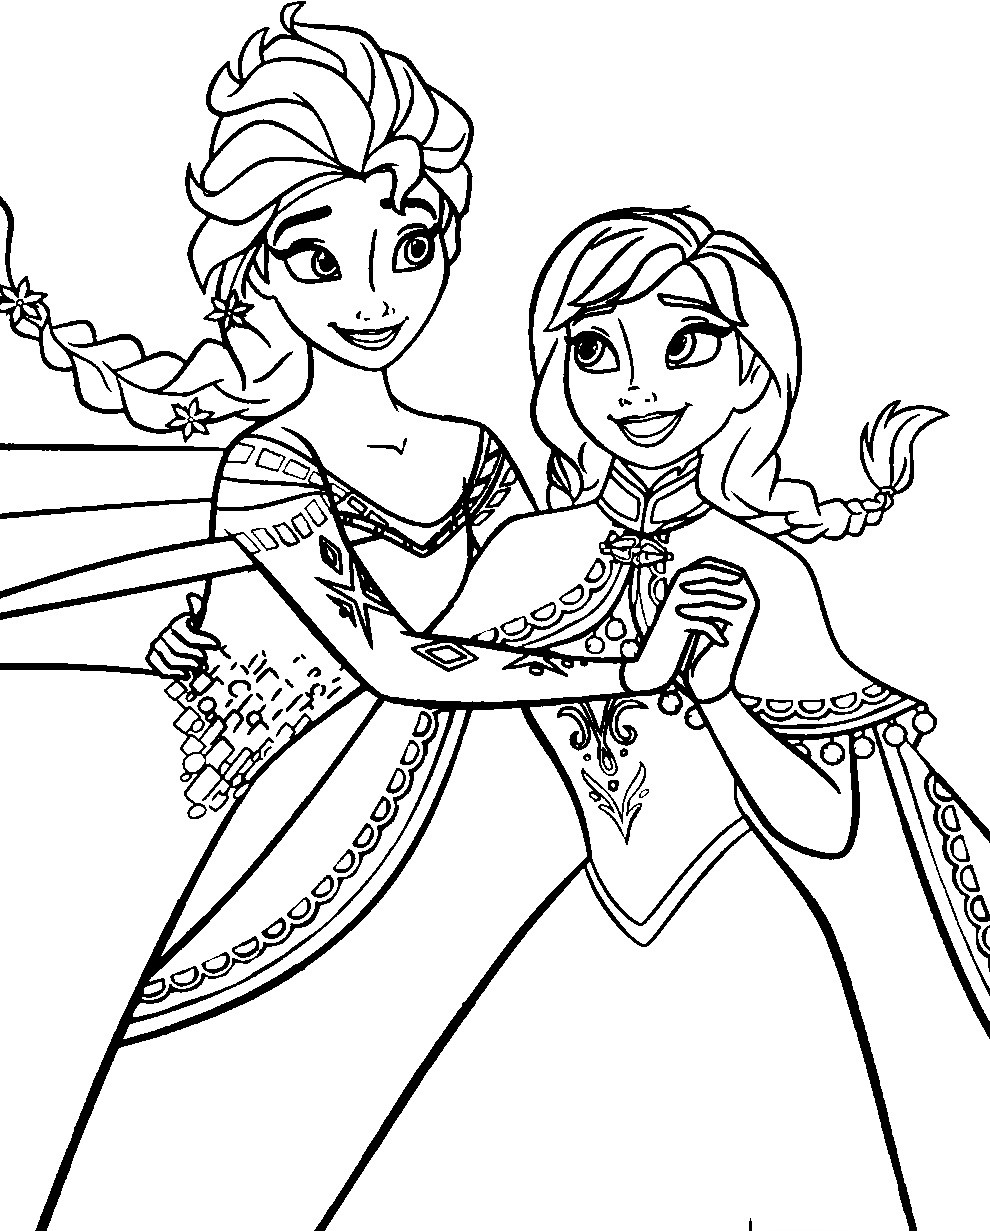 Elsa Printable Coloring Pages
 Disney Frozen Coloring Pages To Download